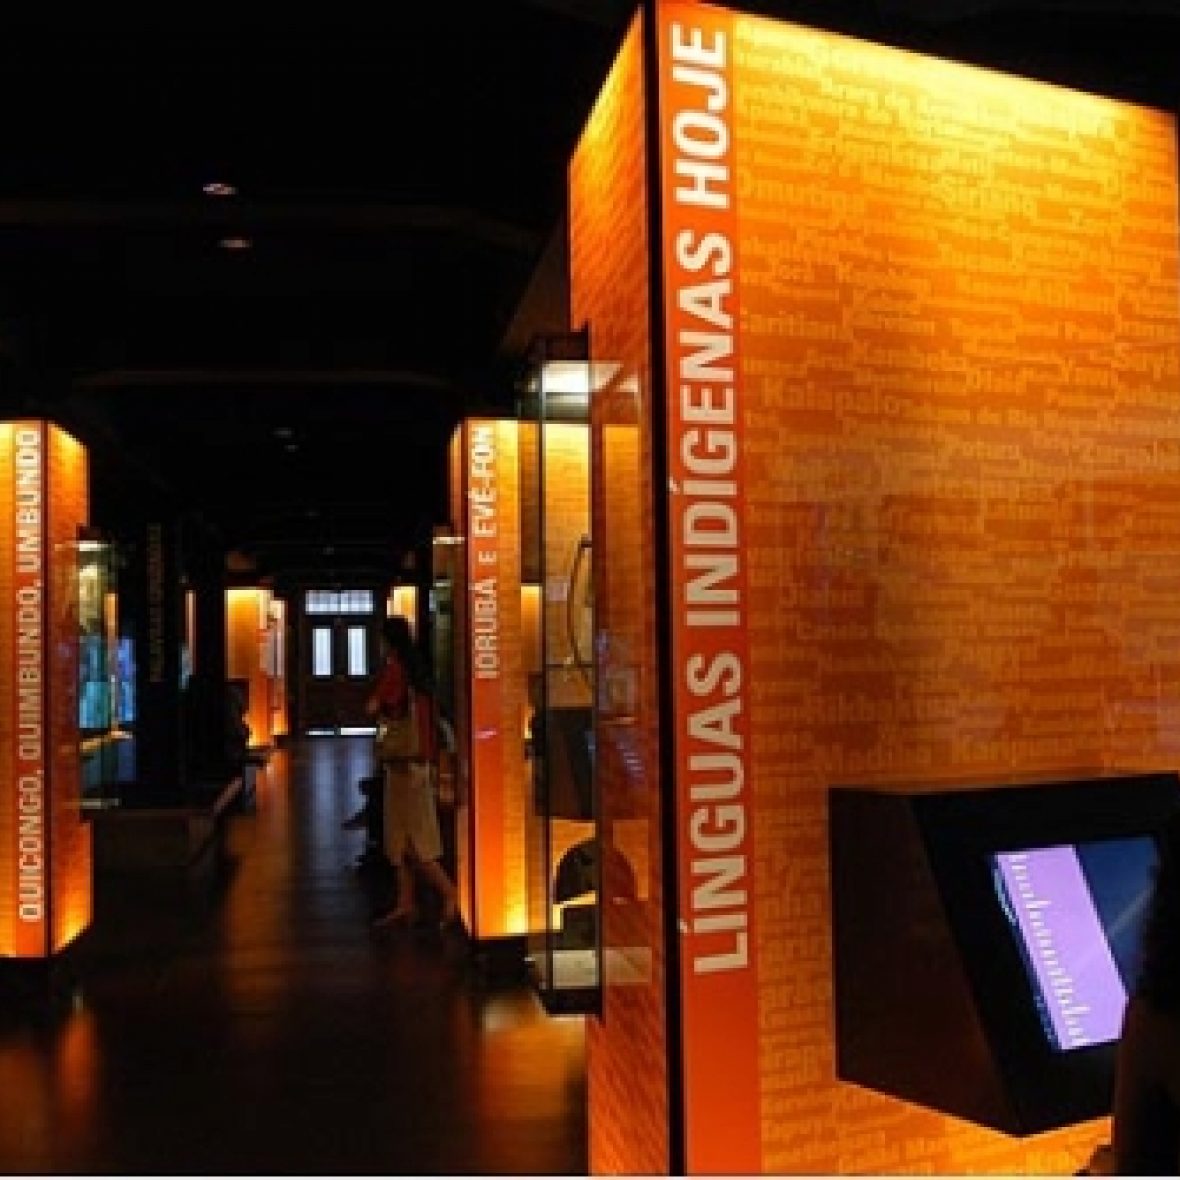 exhibit at the Museum of the Portuguese Language in Brazil, in a dark room with orange walls with writing on them about language history